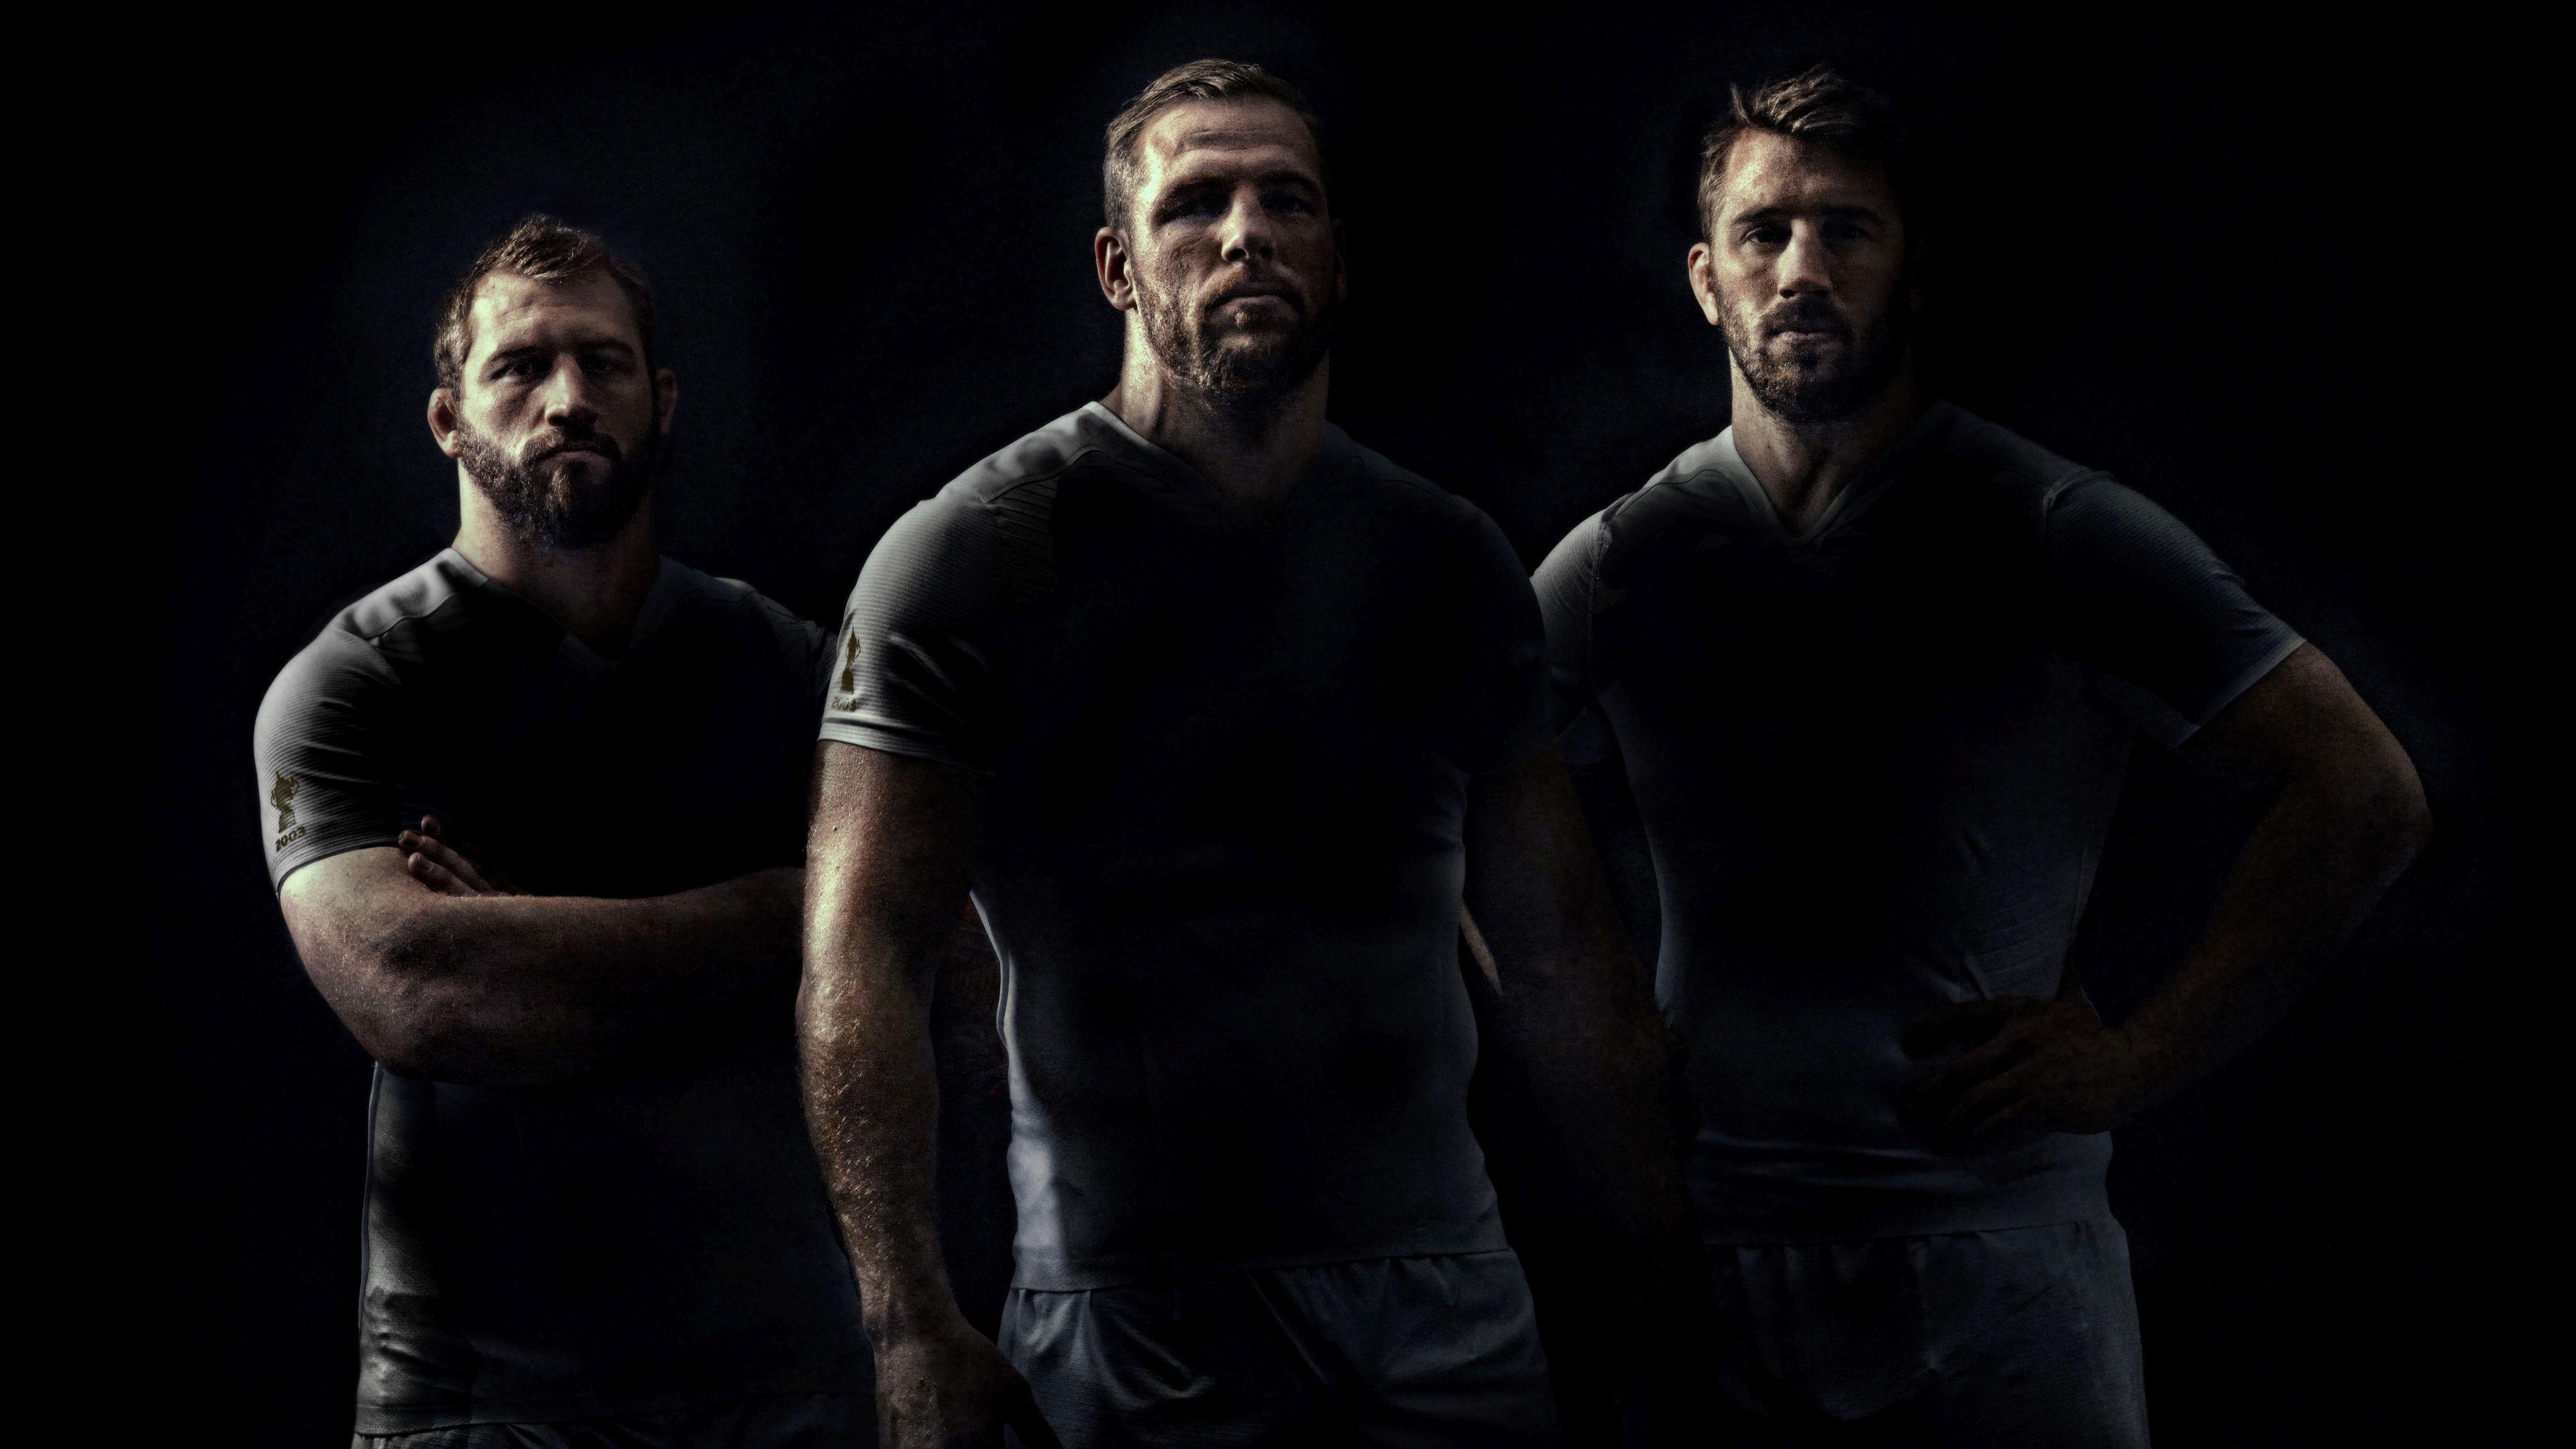 Rugby World Cup 2015 4k Ultra HD Wallpaper. Background